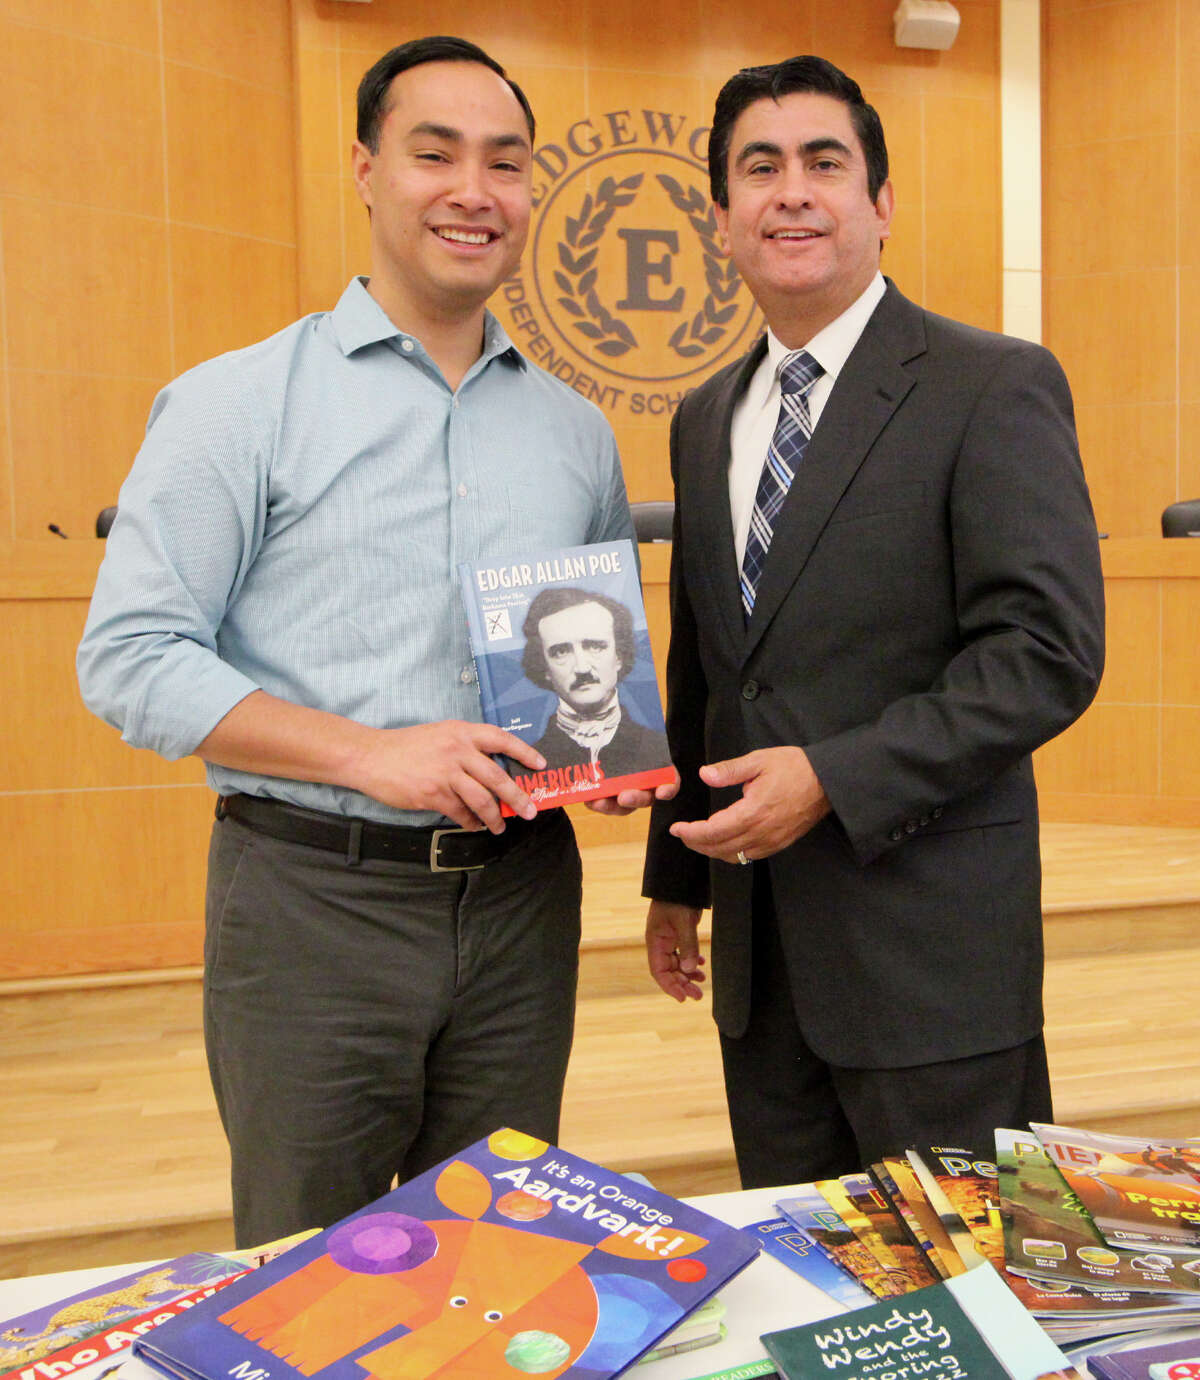 U.S. Rep. Joaquin Castro (left) delivers books donated from the Library of Congress to Edgewood ISD Superintendent Jose Cervantes at the Edgewood ISD Conference Center in the Guerra Center at 1930 Herbert Lane, on Friday, Dec. 19, 2014. The Library of Congress has a program for members of Congress to select surplus books from the Library's collection for donation to libraries in their district. The books are being distributed to the district's elementary and middle schools. MARVIN PFEIFFER/ mpfeiffer@express-news.net